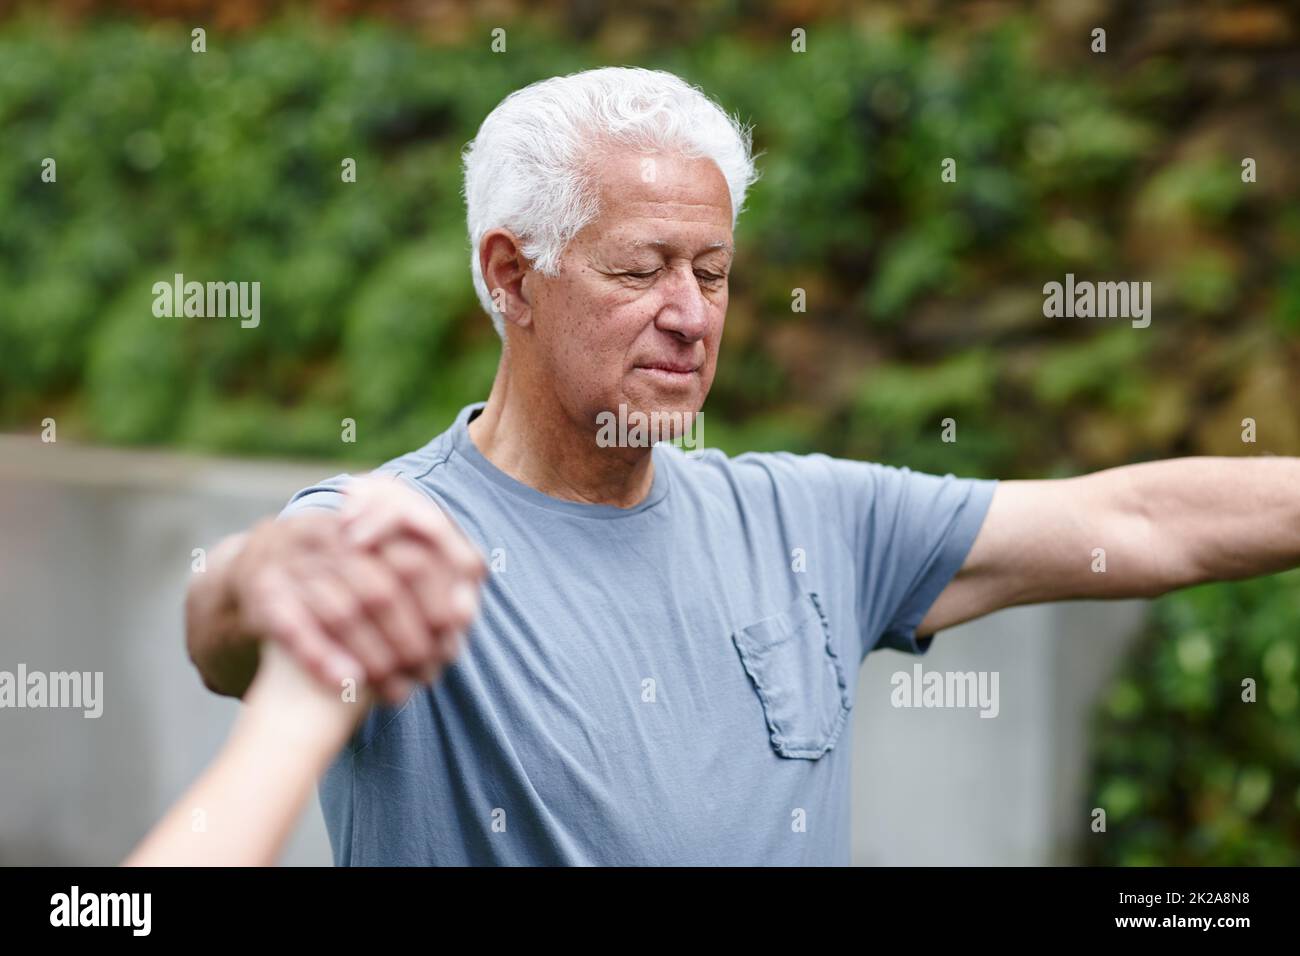 His spirituality is important to him. Shot of a senior man holding hands with the people hes doing yoga with. Stock Photo